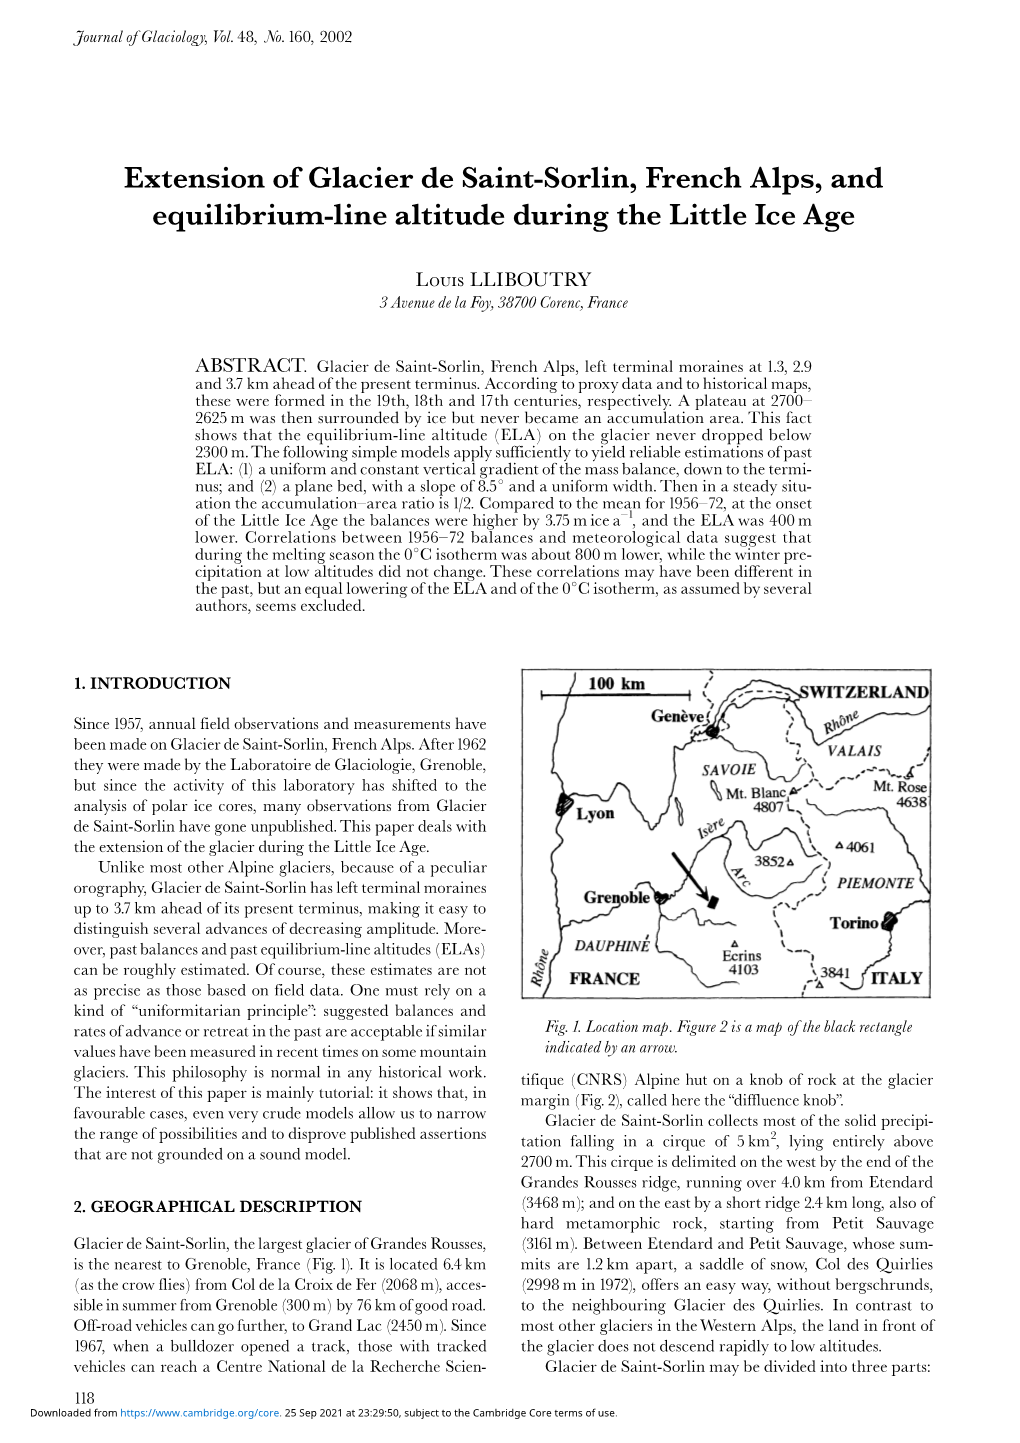 Extension of Glacier De Saint-Sorlin, French Alps, and Equilibrium-Line Altitude During the Little Ice Age